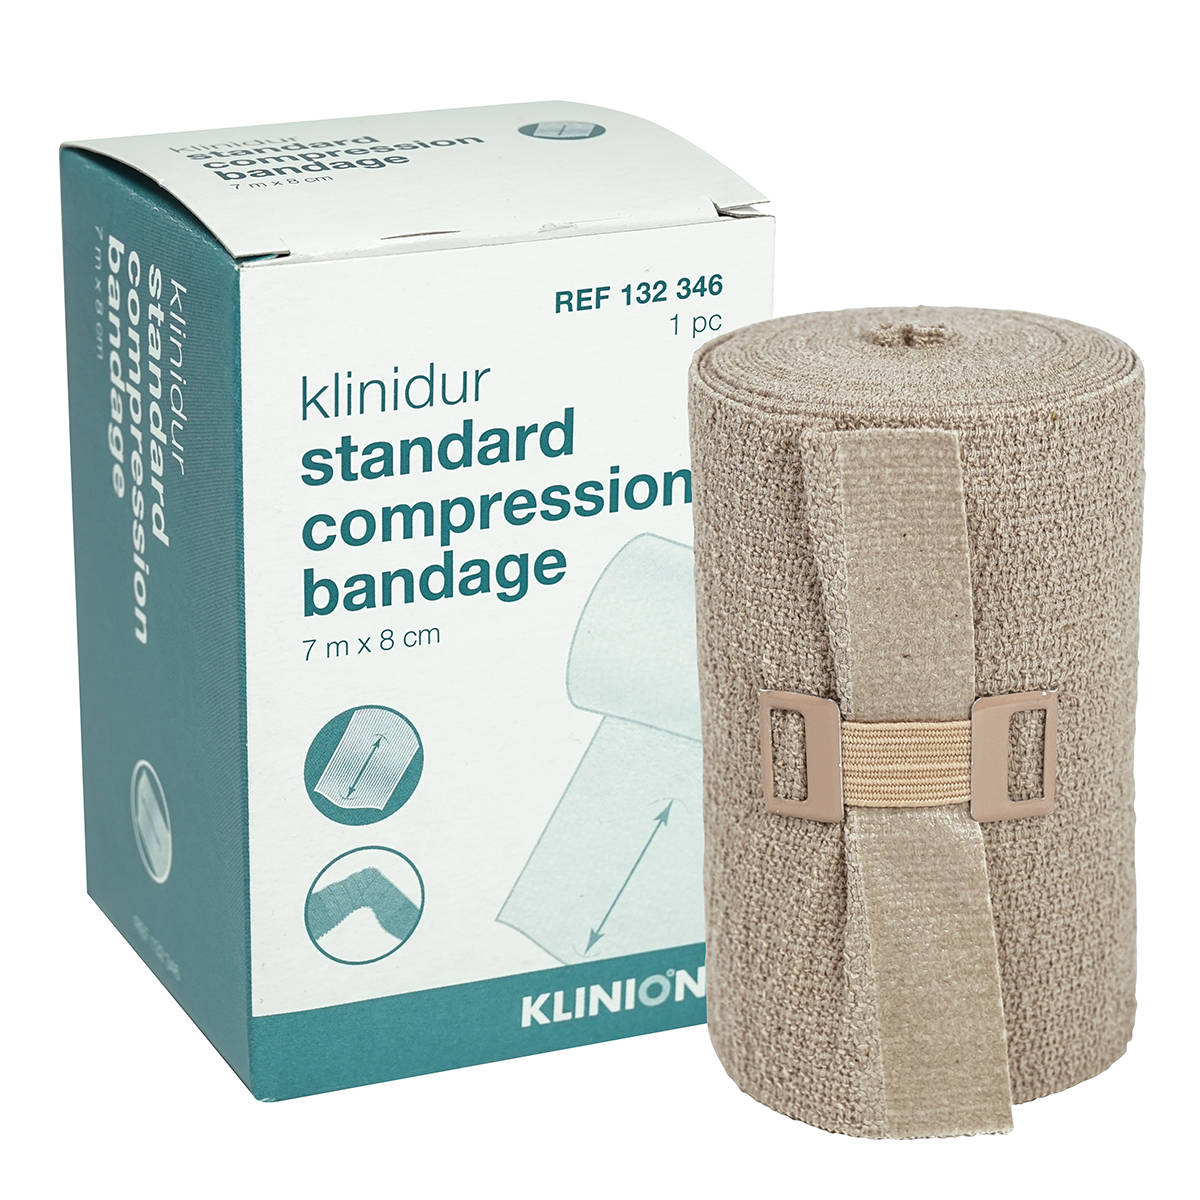 Wound care products and wound management solutions